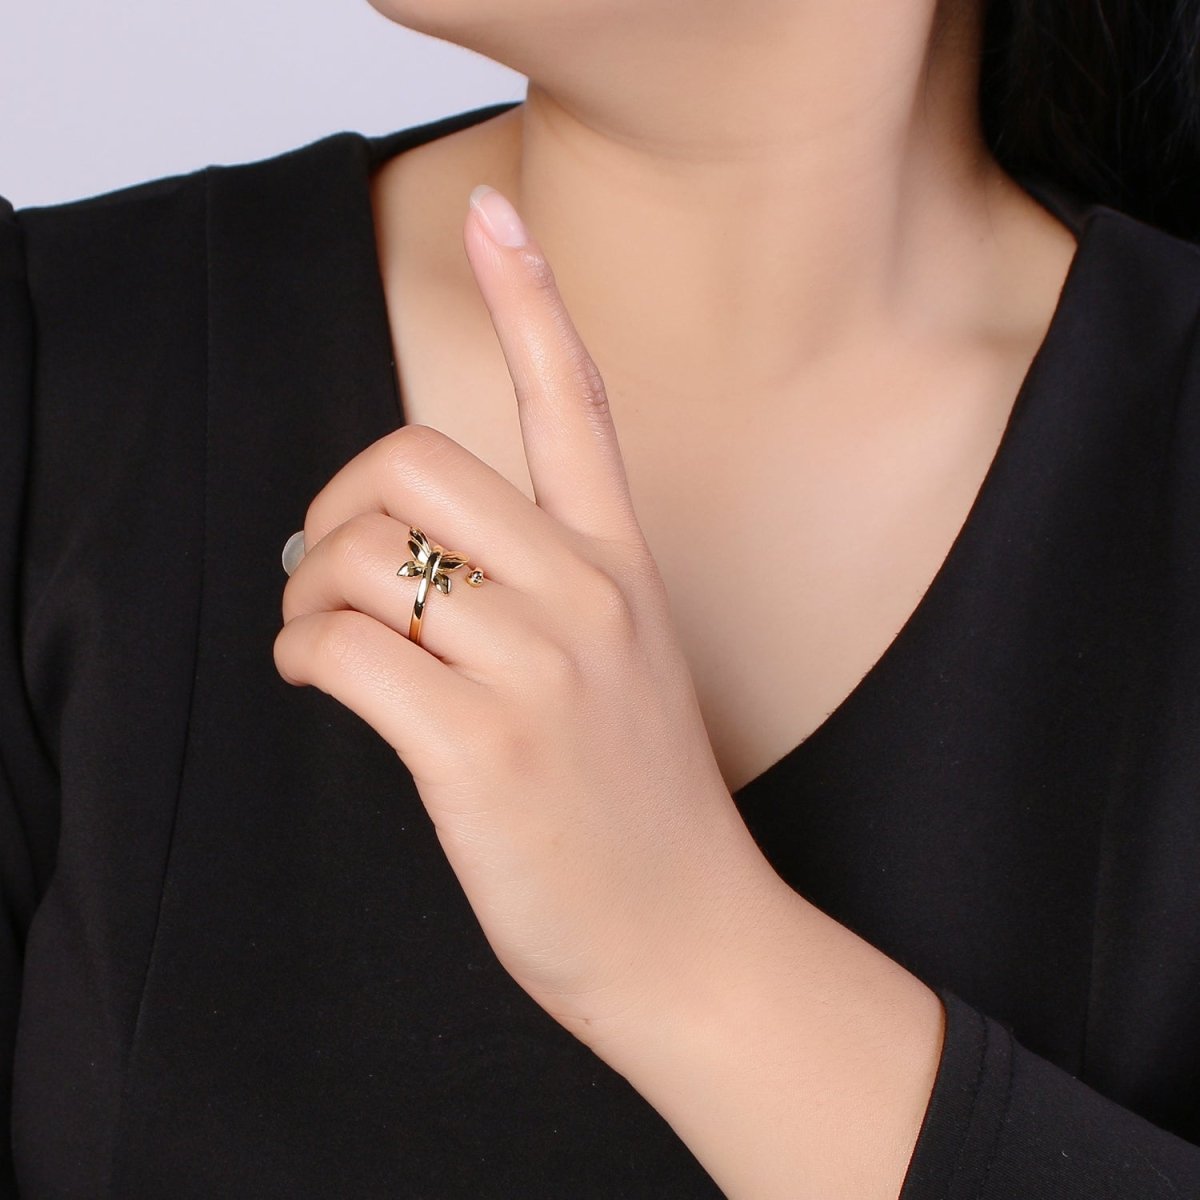 1pc Flying Butterfly 24K Ring, Adjustable Gold Curb Ring, Simple Mariposa Ring, Garden lover Ring, Bow Ring R530 - DLUXCA